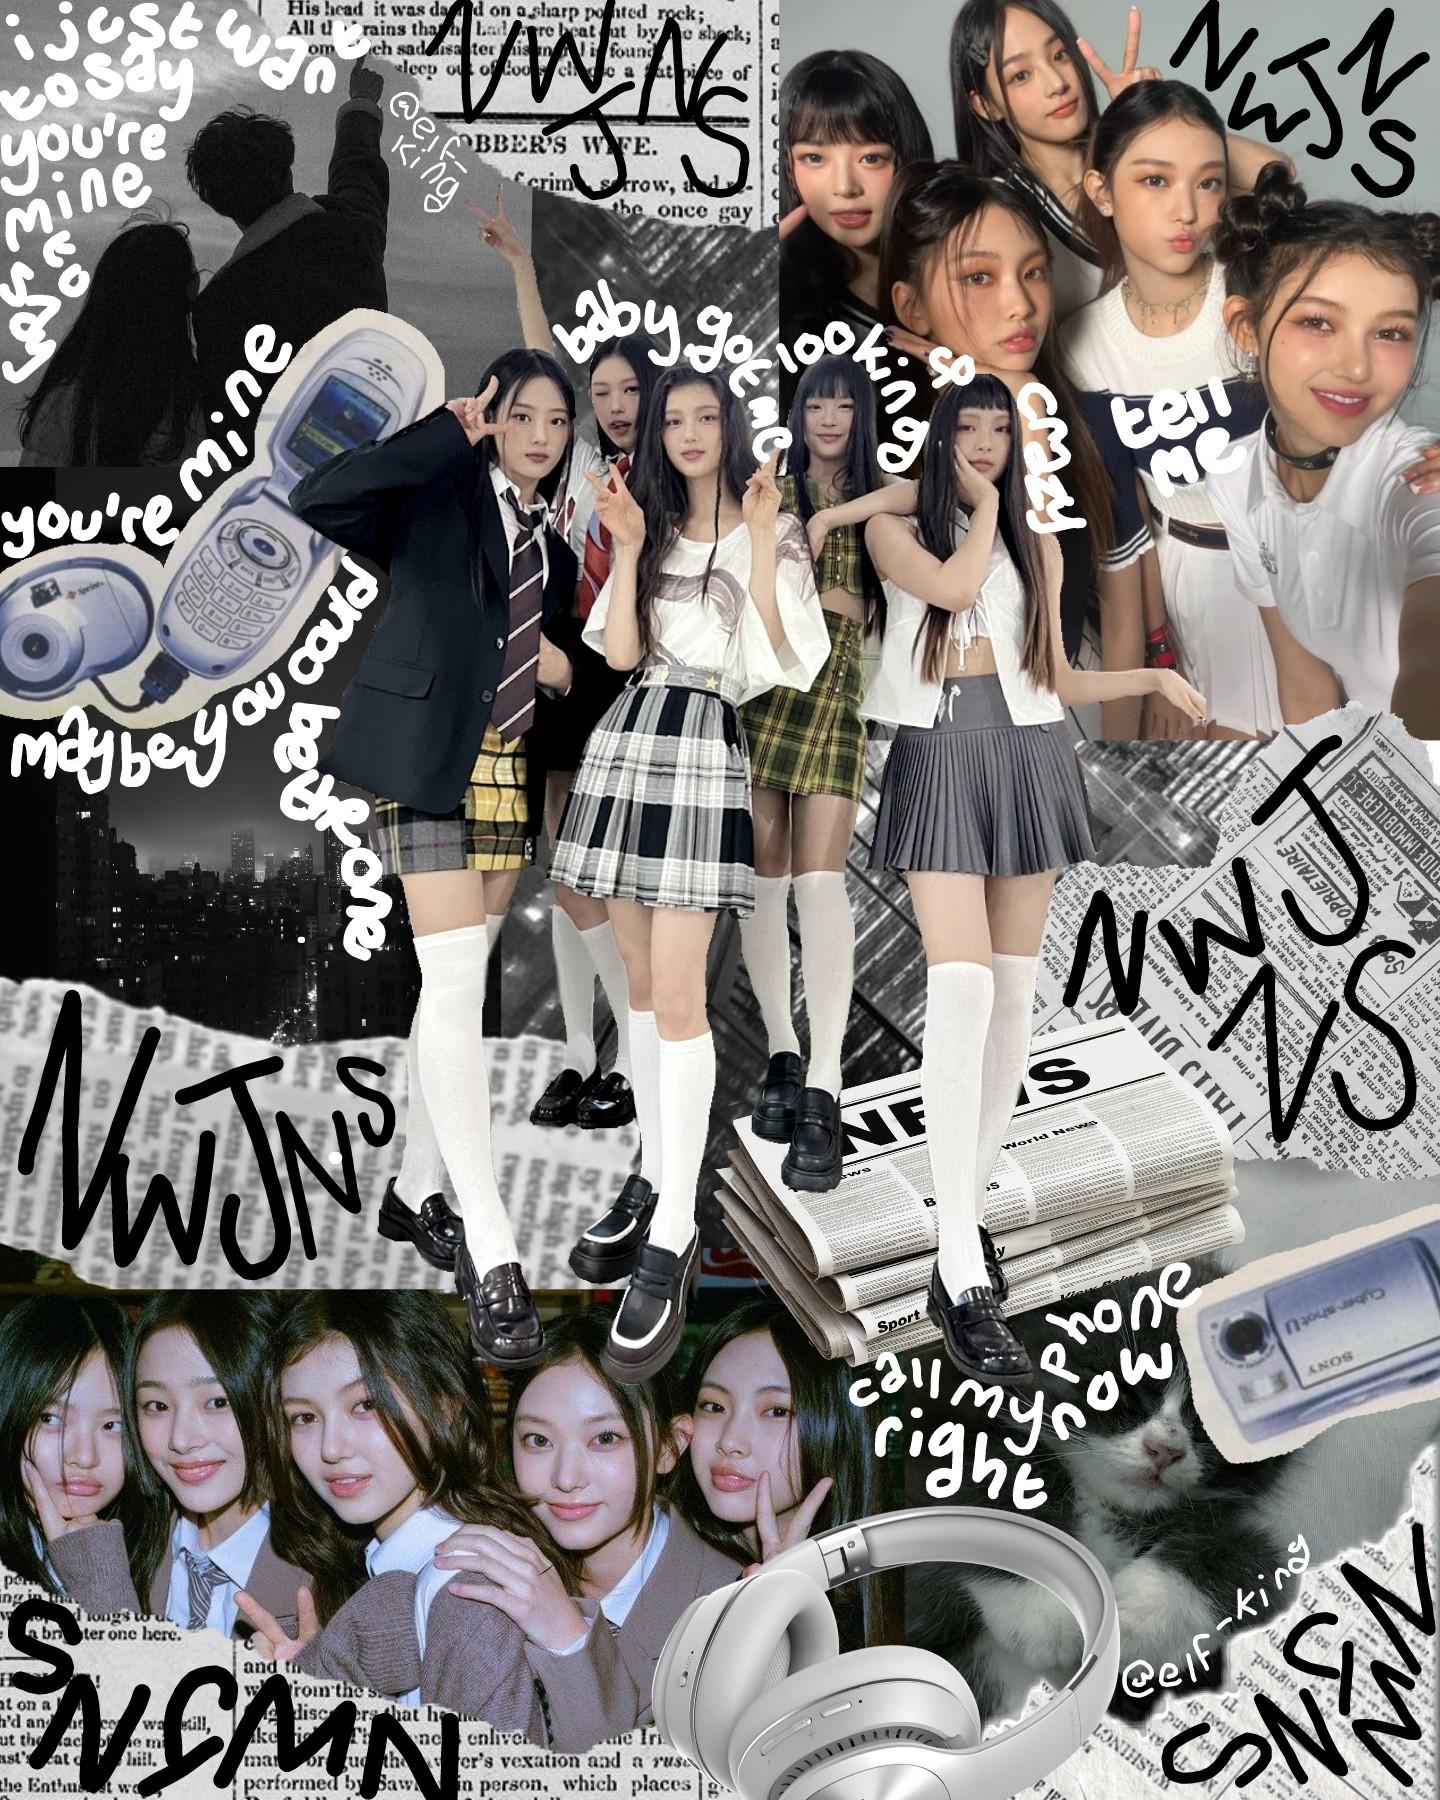 tribute to the girl group who's currently taking over the world rn (I'm super excited for their July comeback!) hopefully even if you don't know them, you can appreciate how pretty they are😂
5-stars collage coming soon